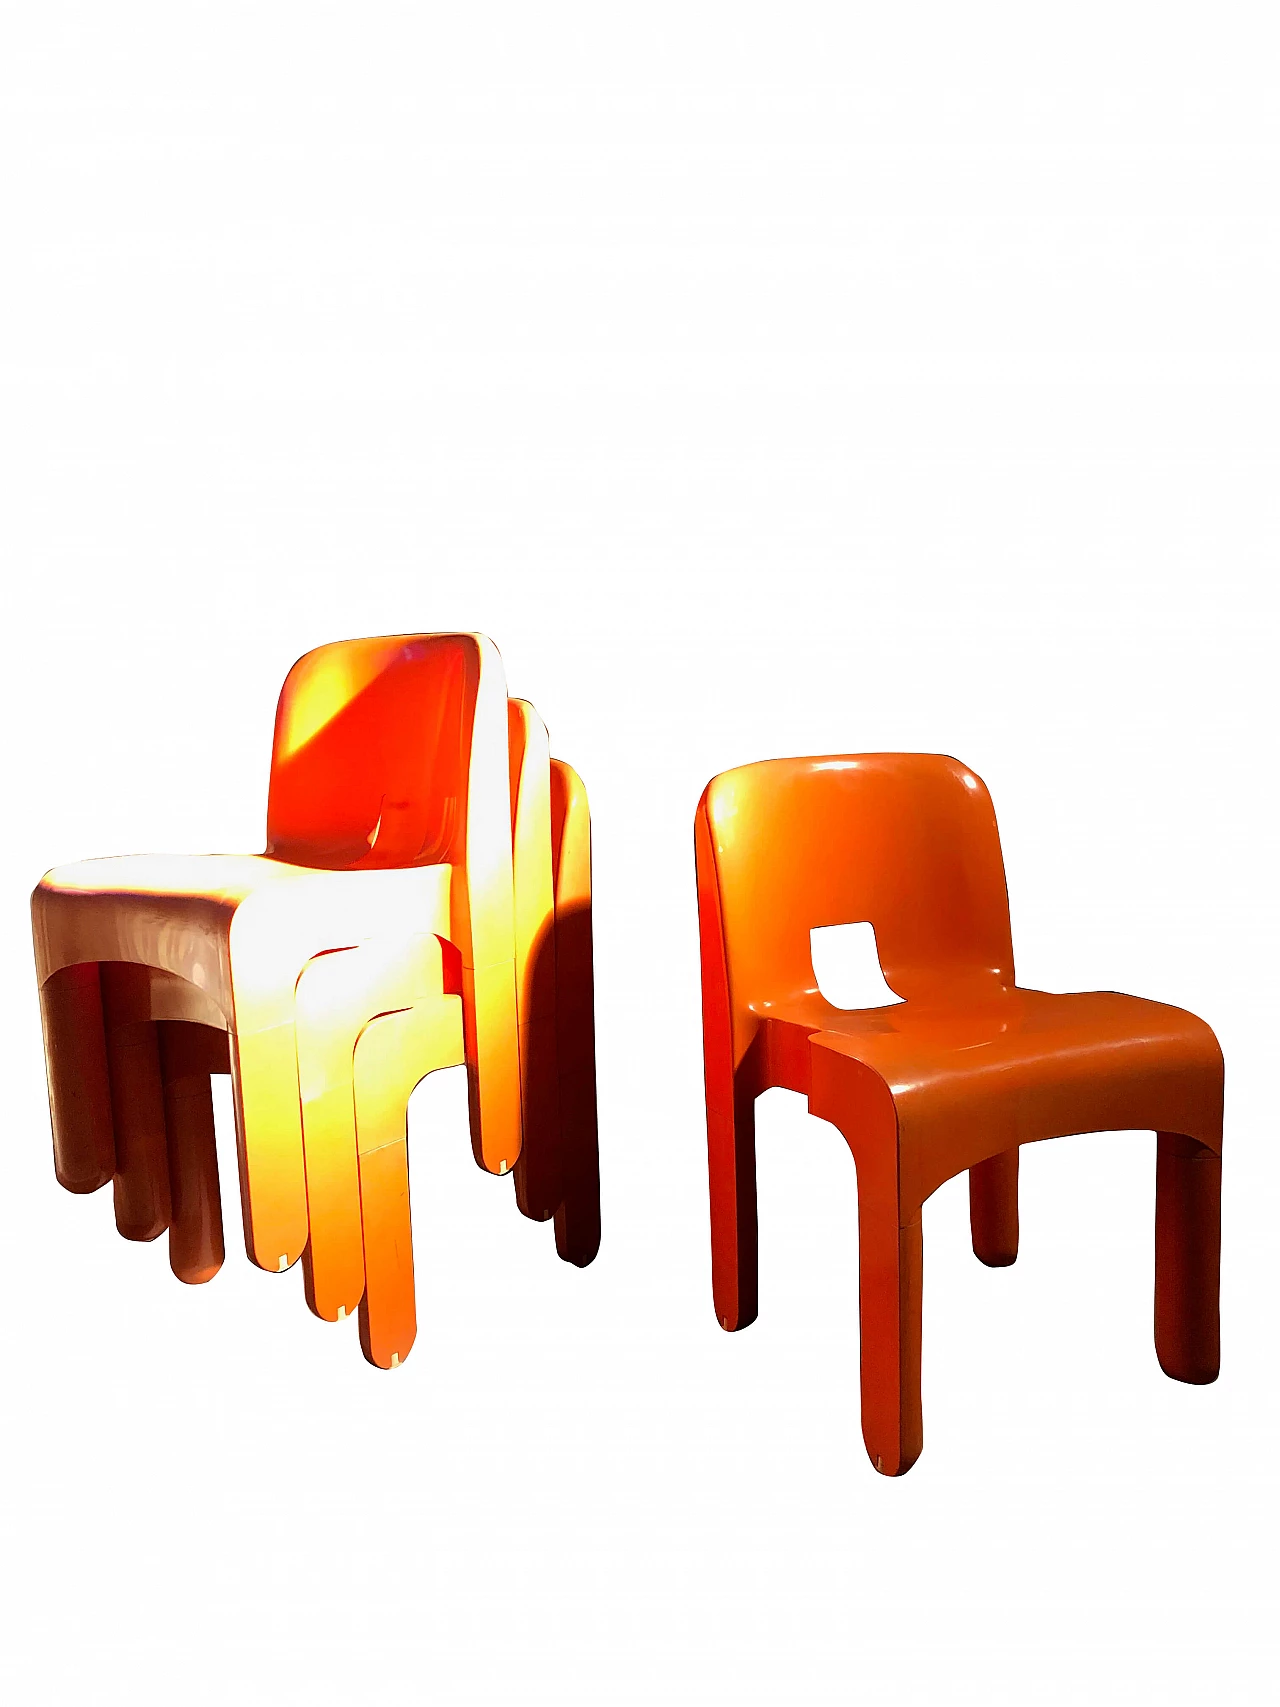 4 Universal Chairs 4867 by Joe Colombo for Kartell 1148410